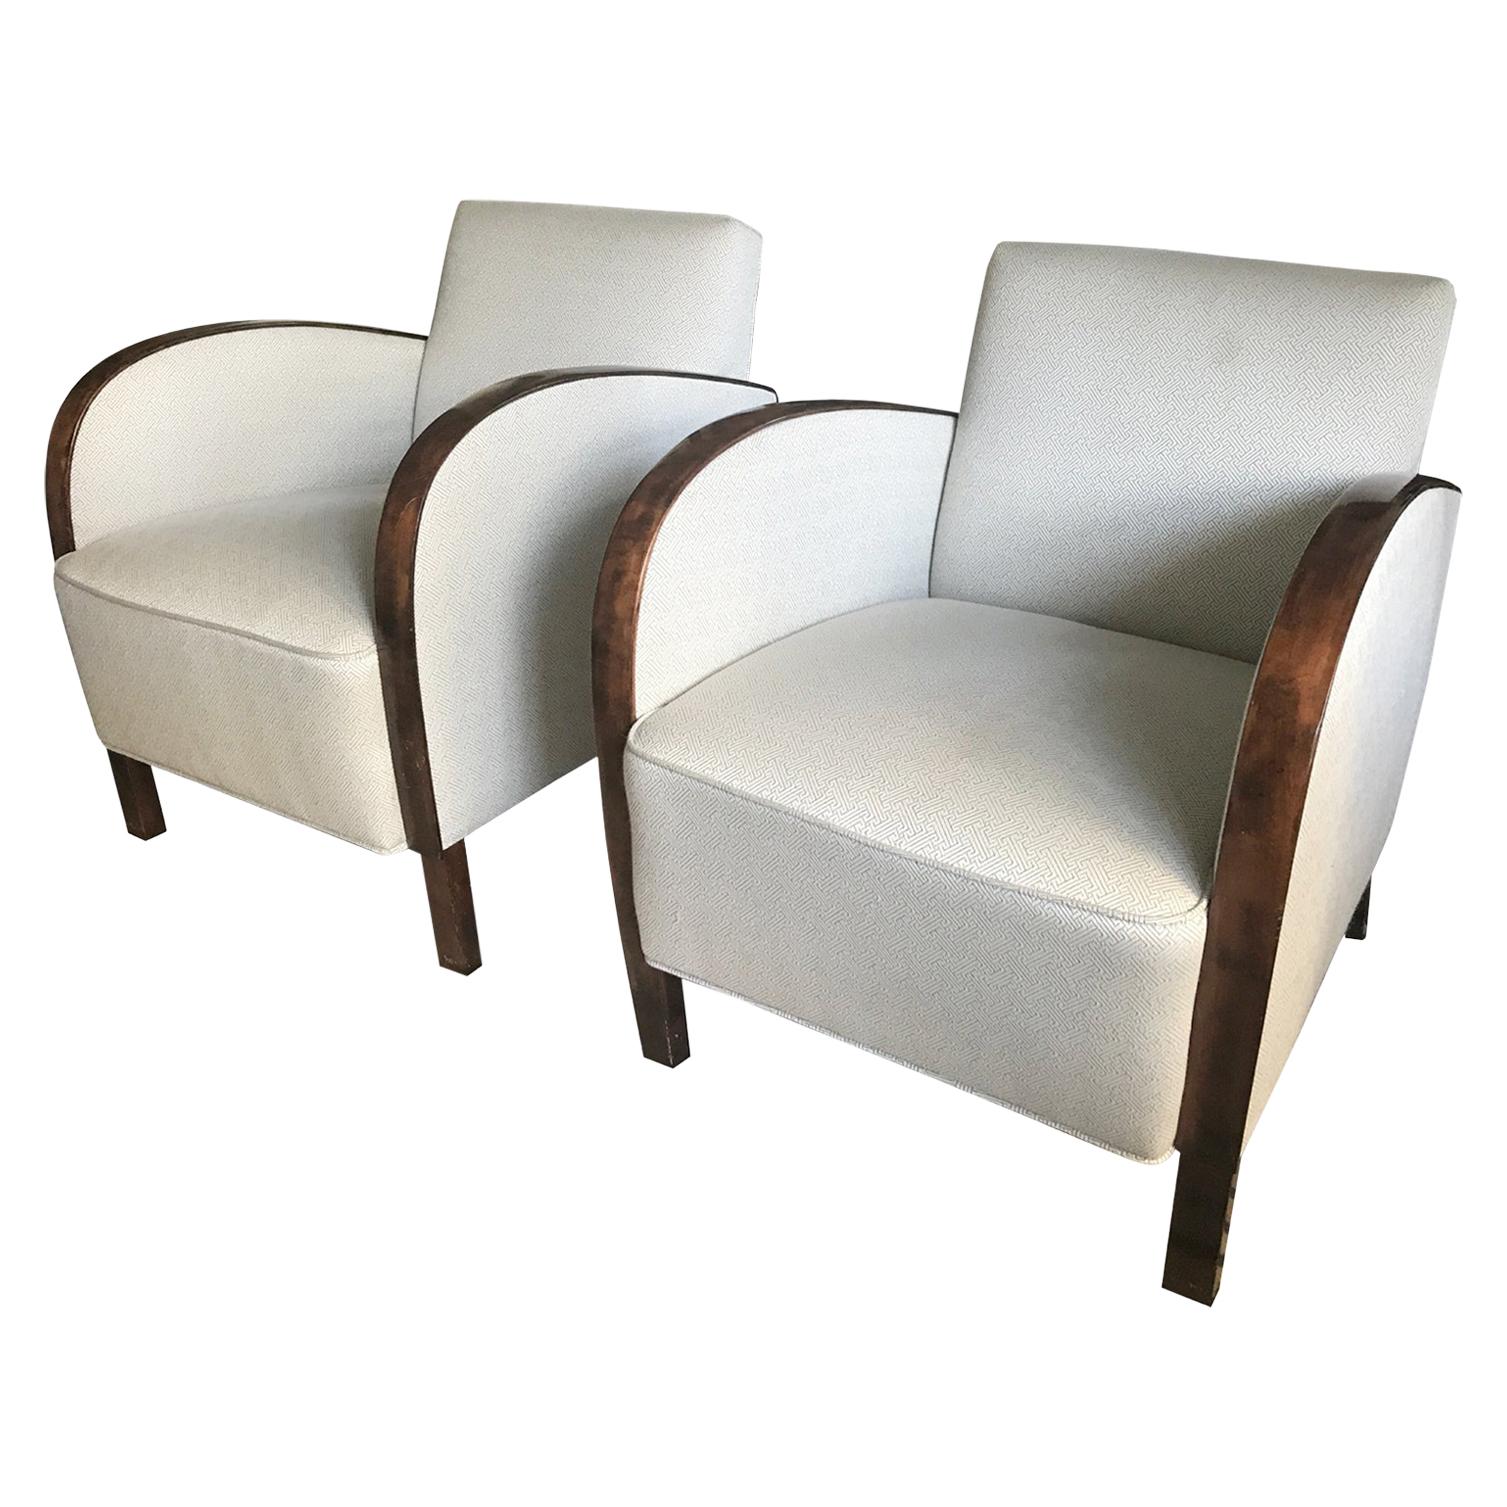 Newly Upholstered Cream / Off White Pair of Swedish Art Deco Club Chairs